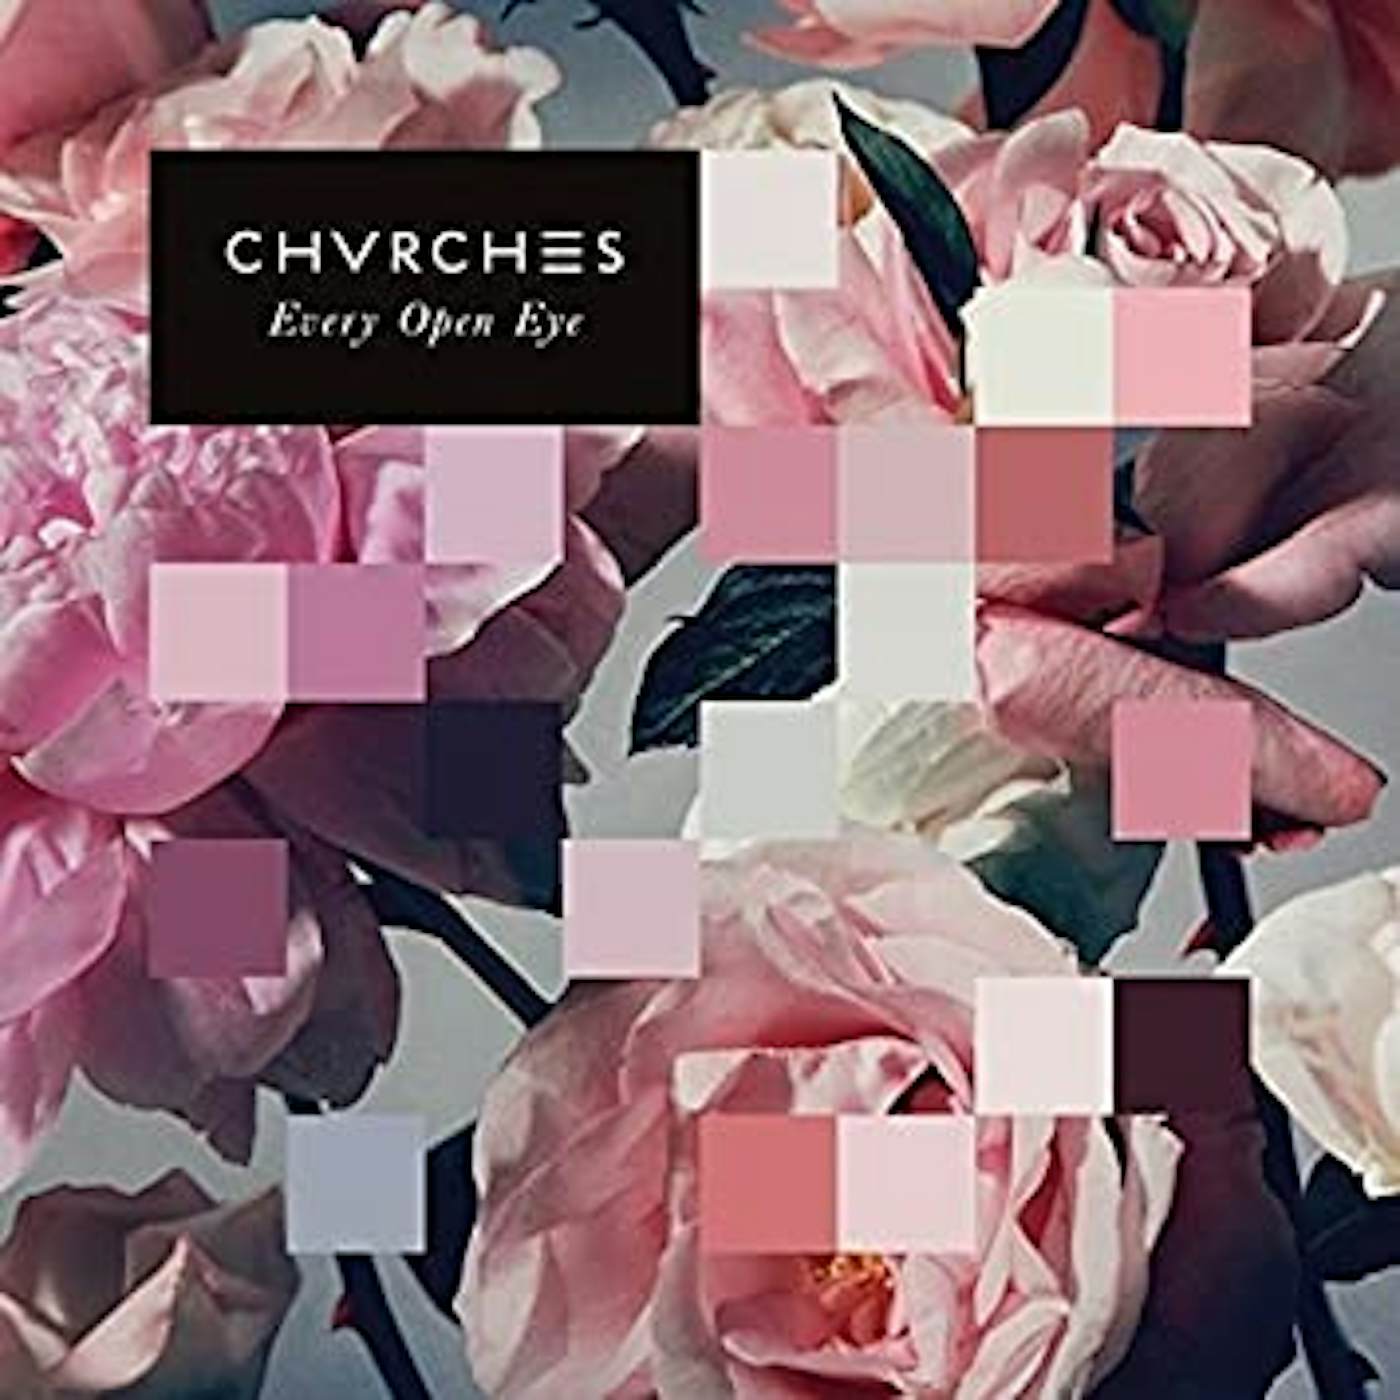 CHVRCHES LEAVE A TRACE Vinyl Record - 10 Inch Single, UK Release